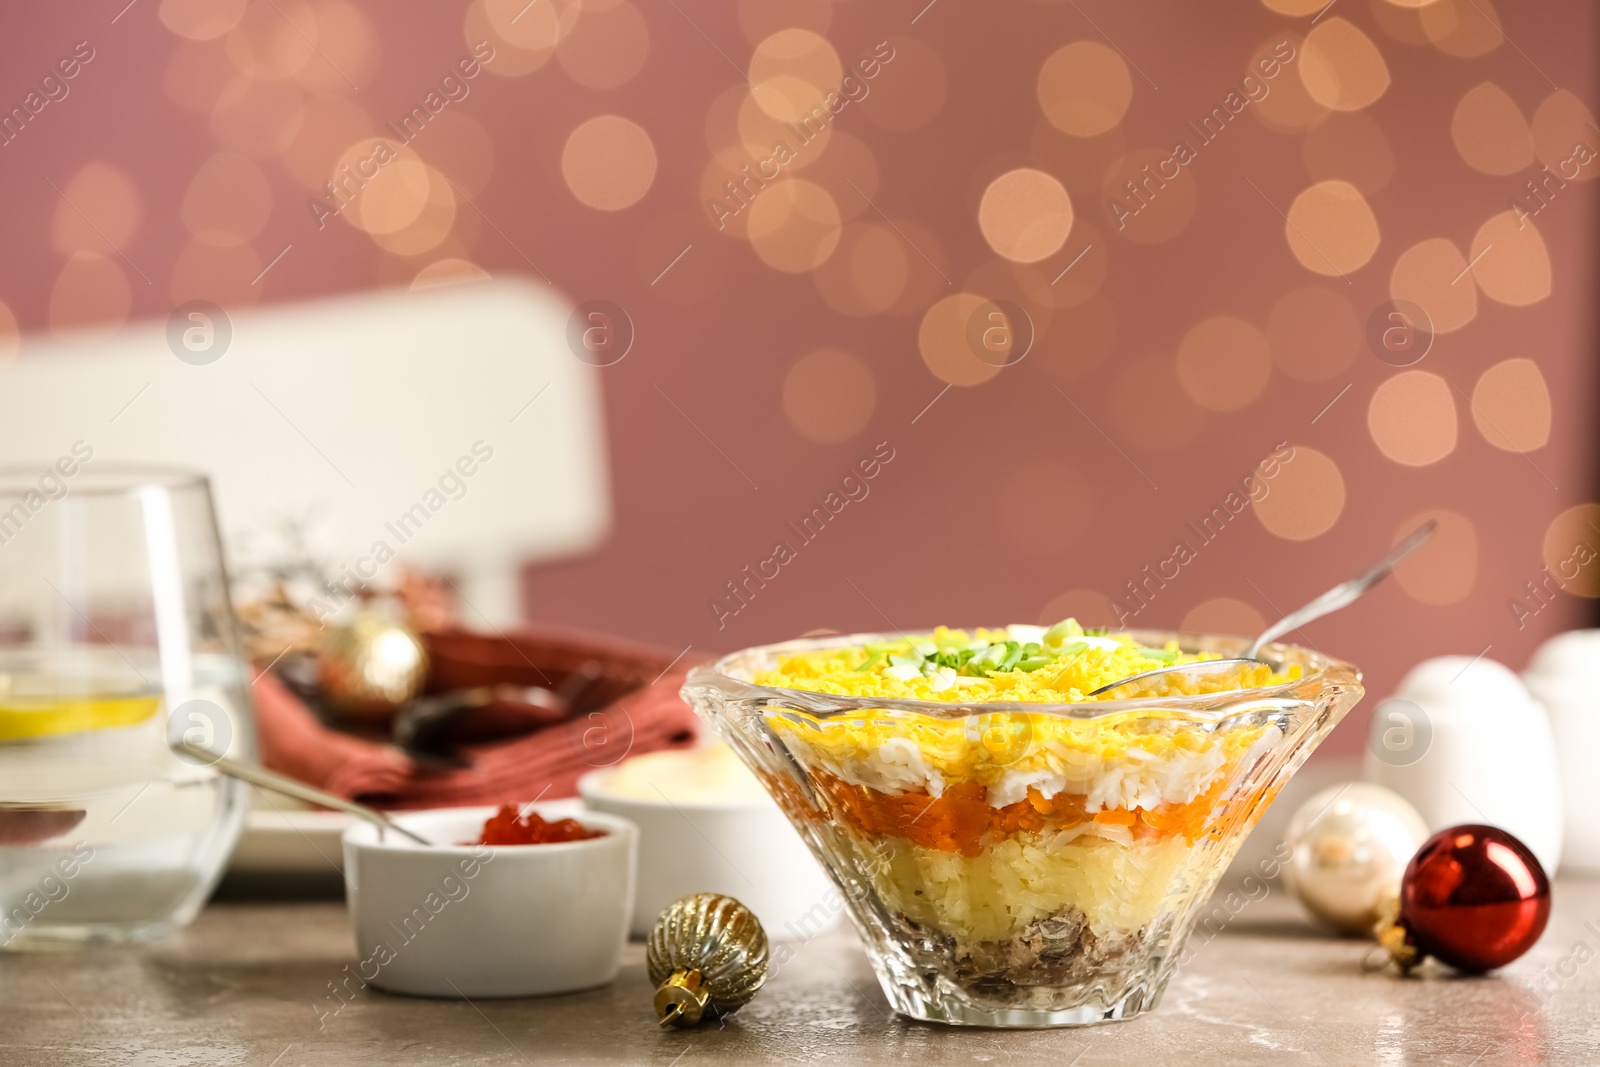 Photo of Traditional russian salad Mimosa and festive decor on table against blurred lights